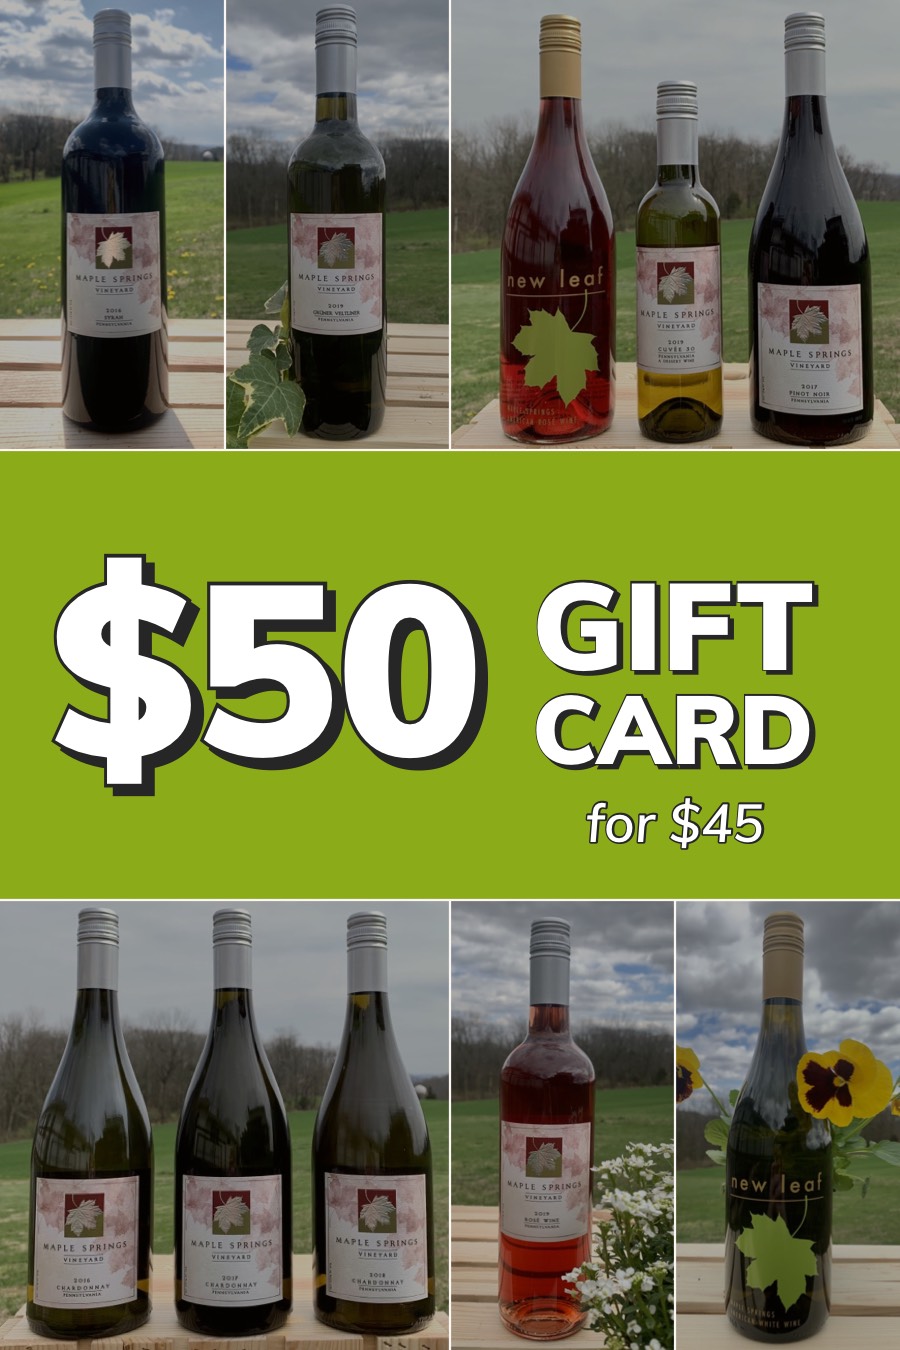 Product Image for Gift Card - $50